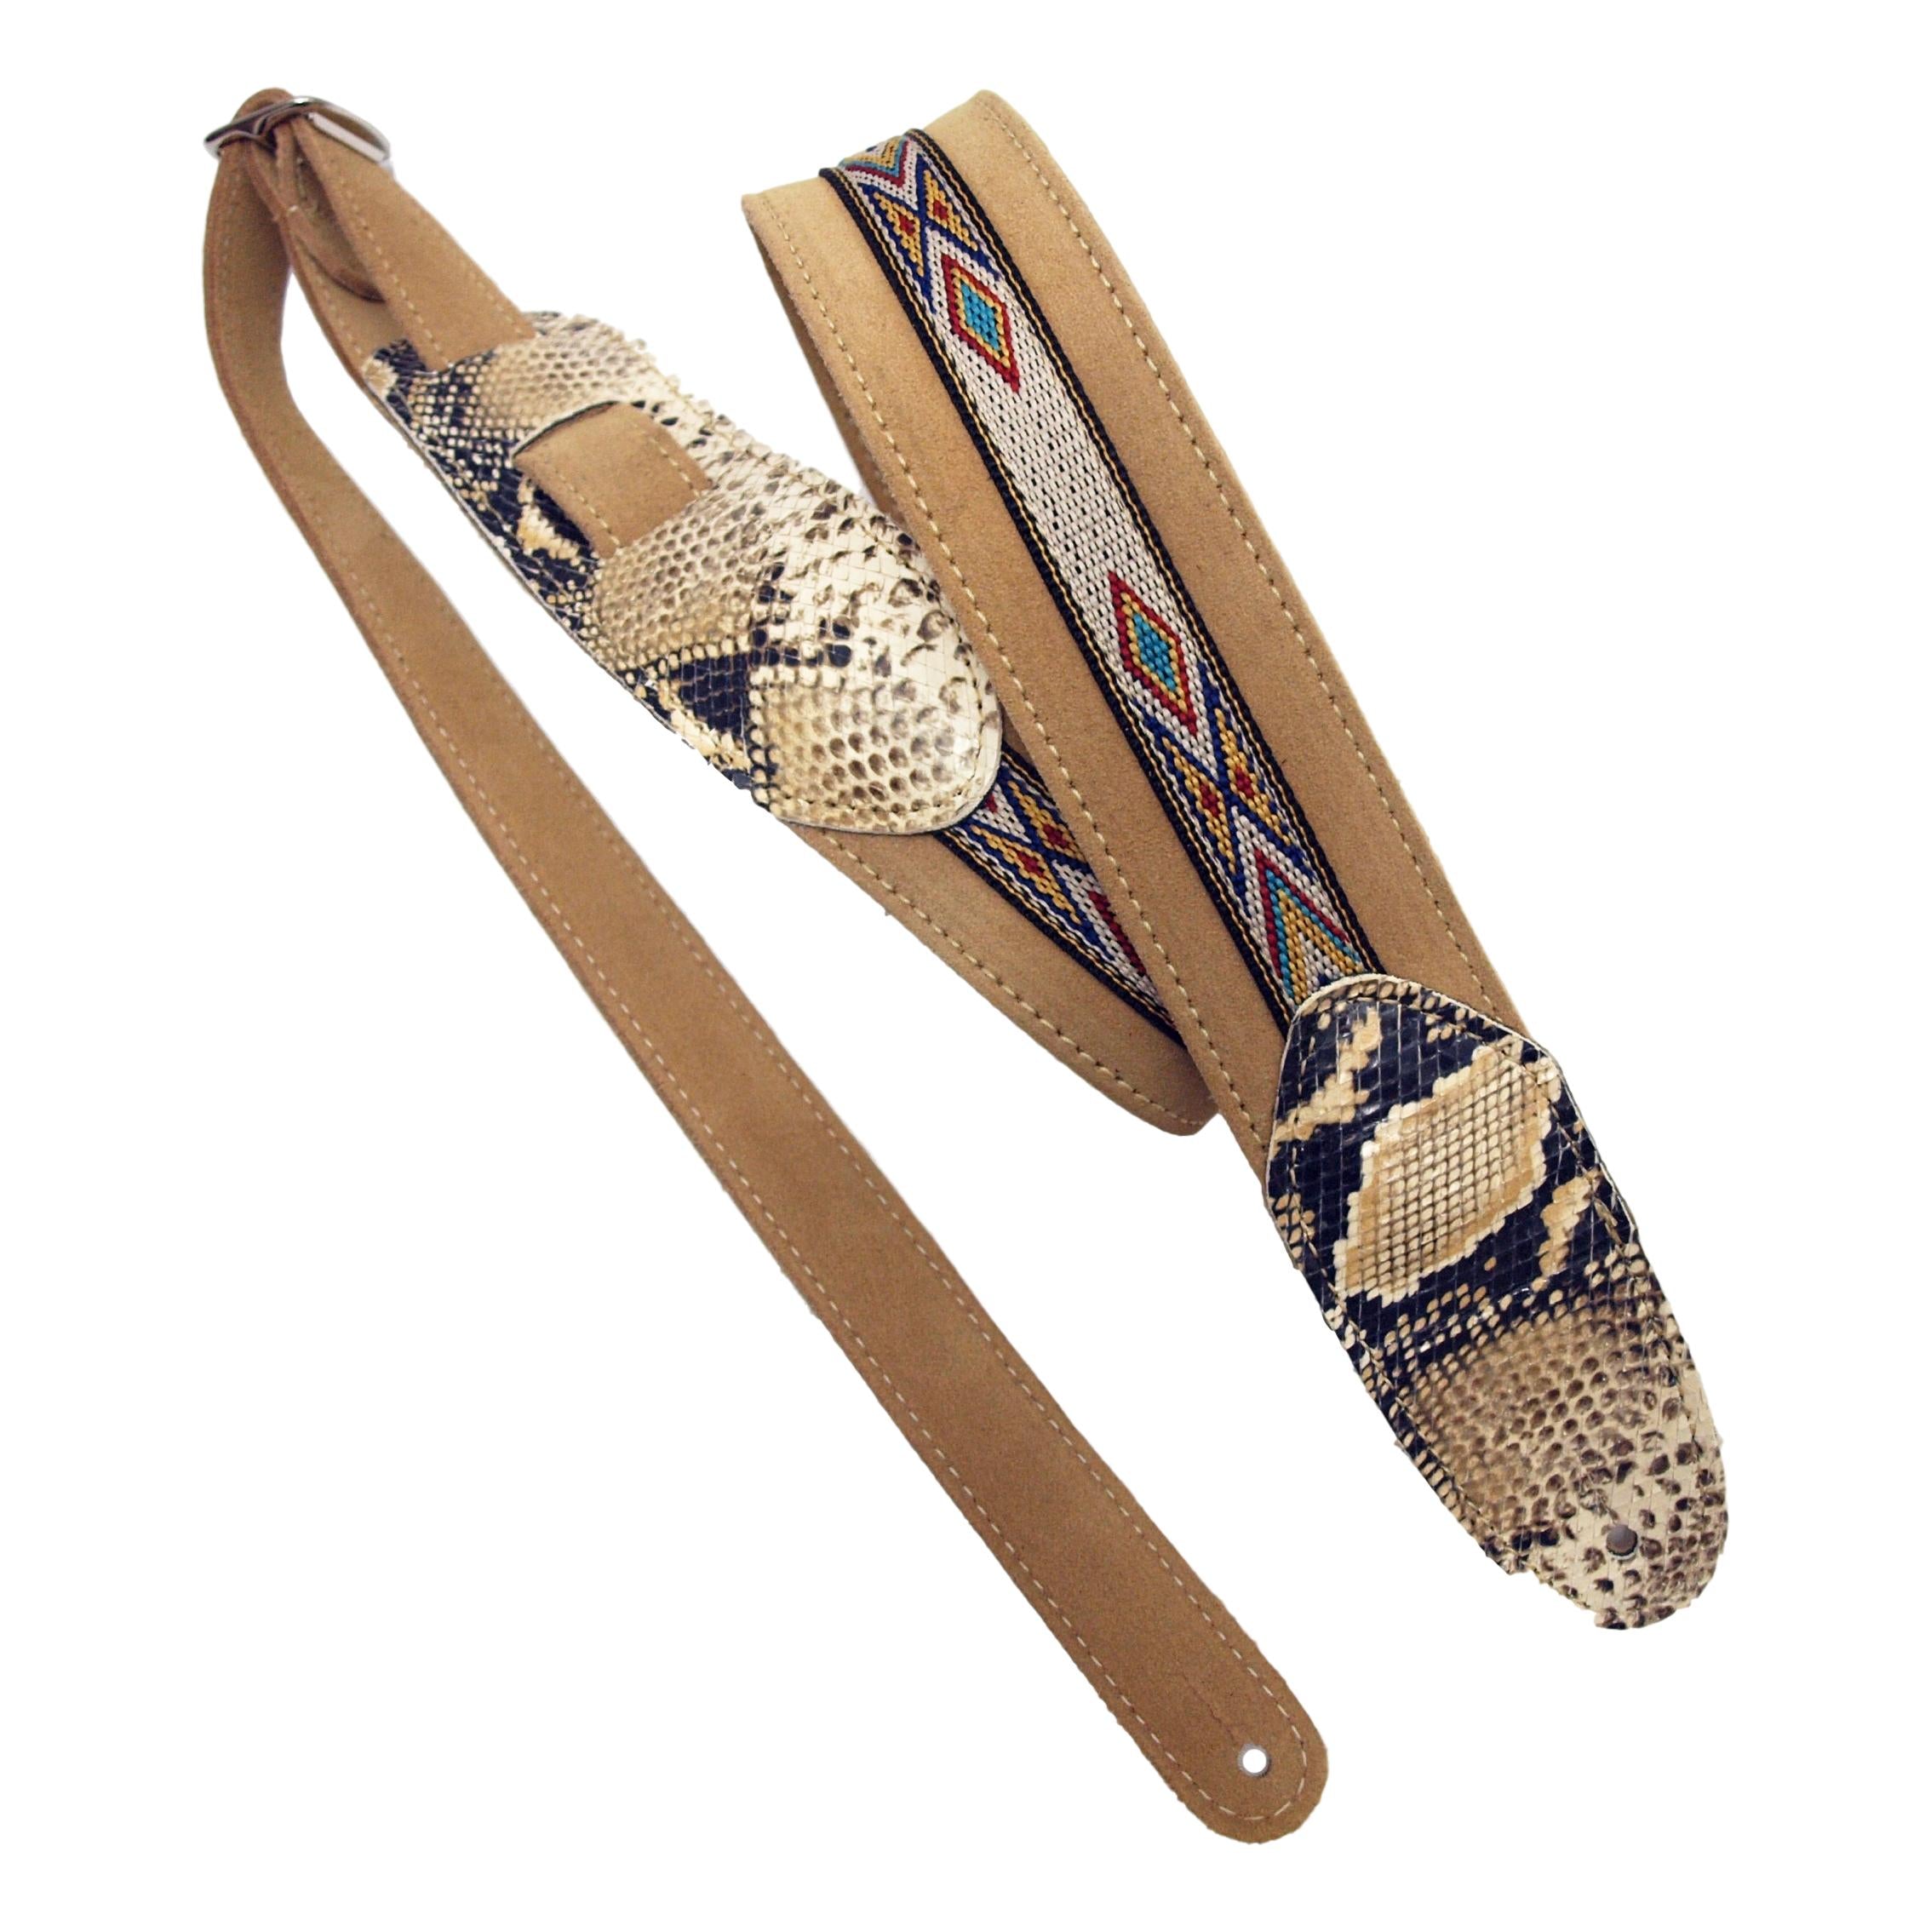 Louis Vuitton Black Guitar Strap - A World Of Goods For You, LLC